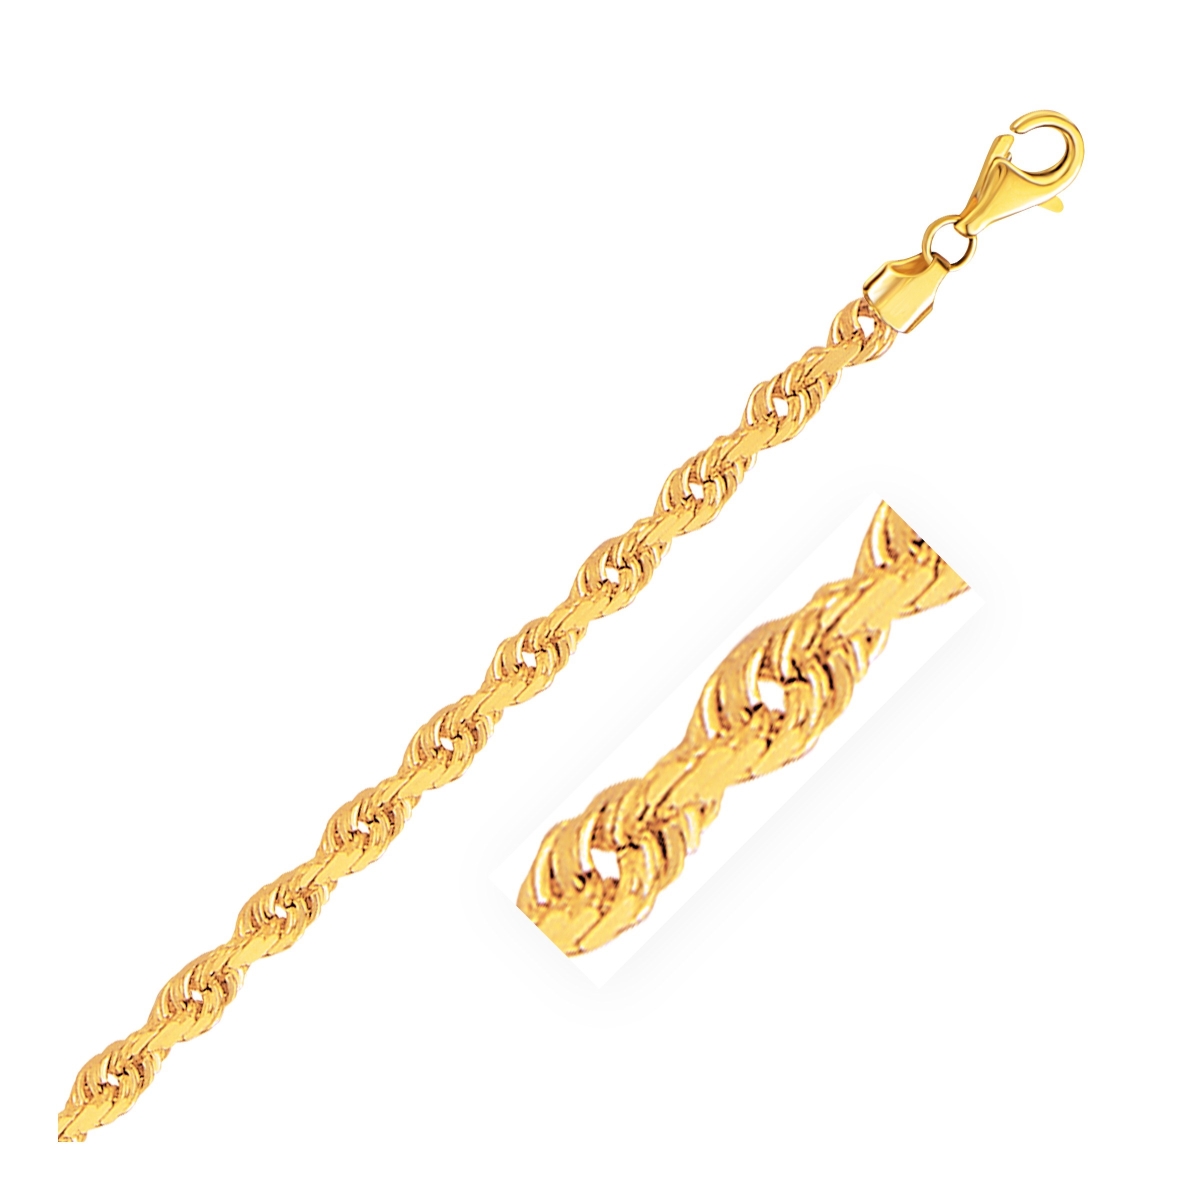 D82290762-8 5 Mm 10k Yellow Gold Solid Diamond Cut Rope Bracelet - Size 8 In.